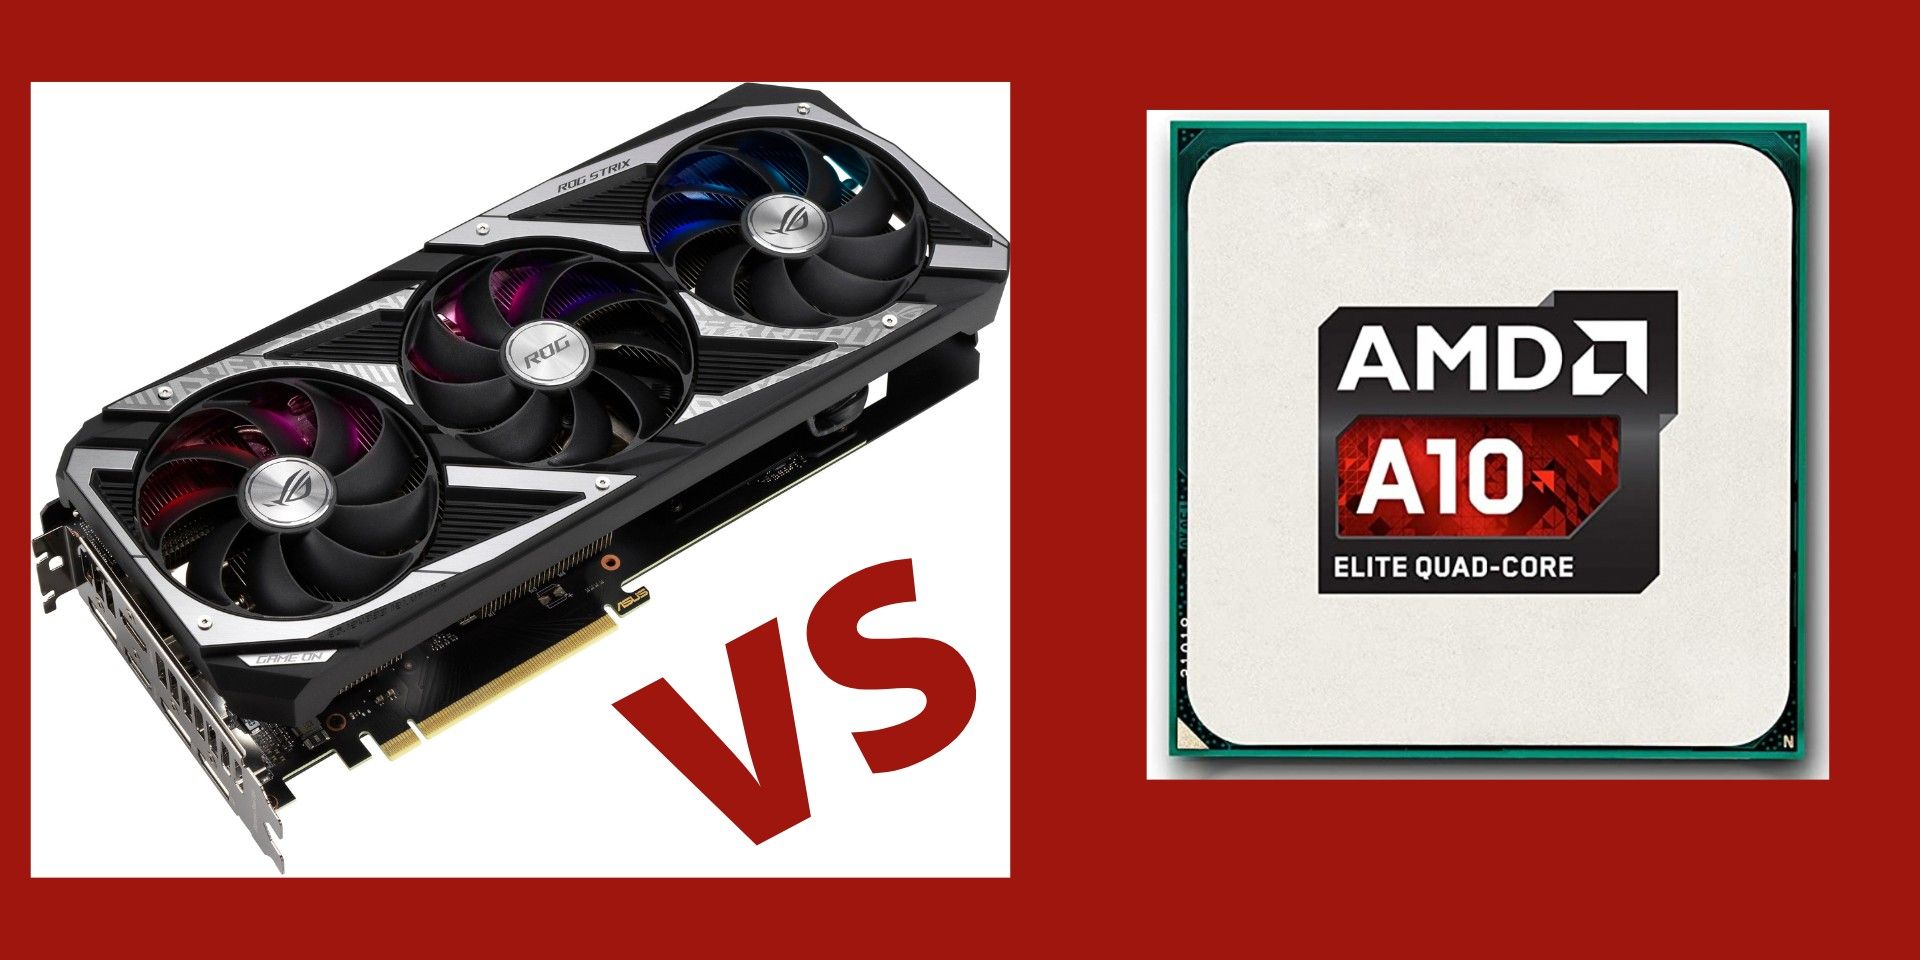 APU Vs. Card: Which Is The Better Buy?